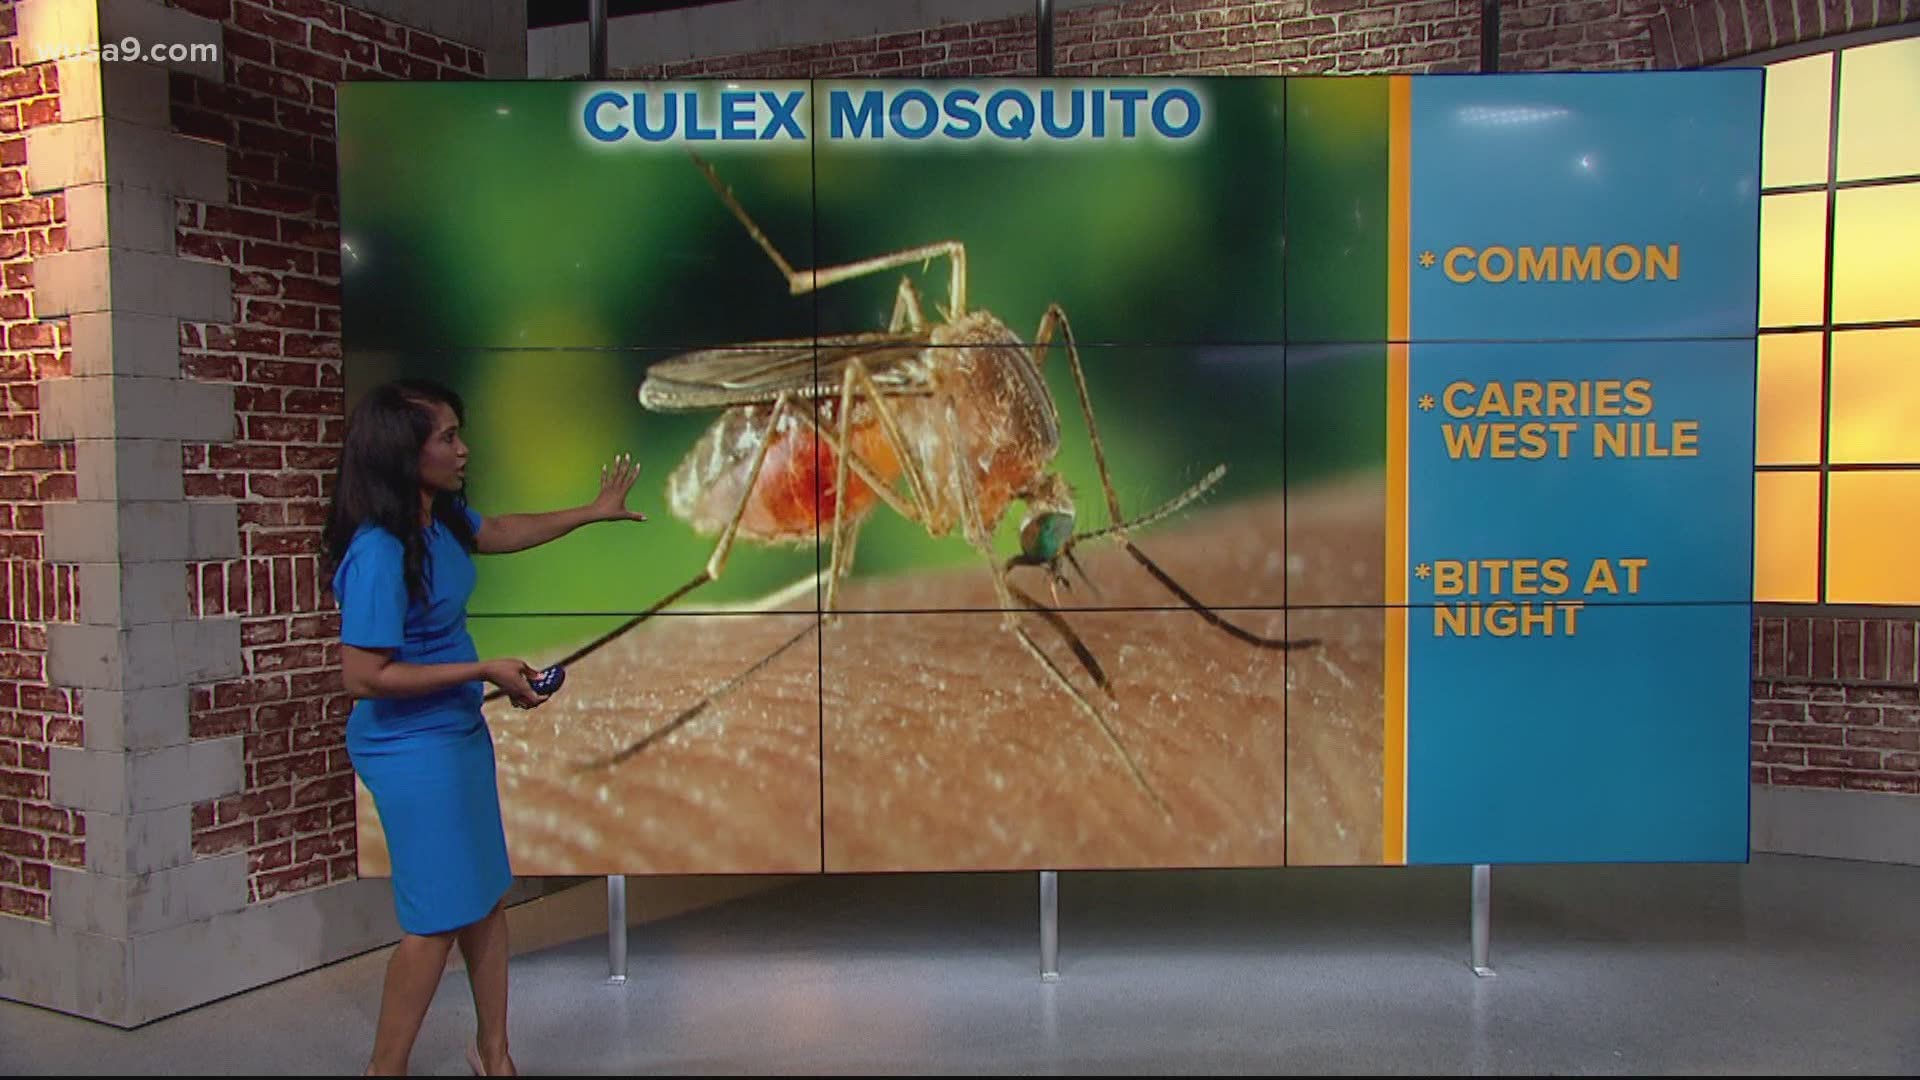 Here's how you might be able to avoid mosquito bites this summer.